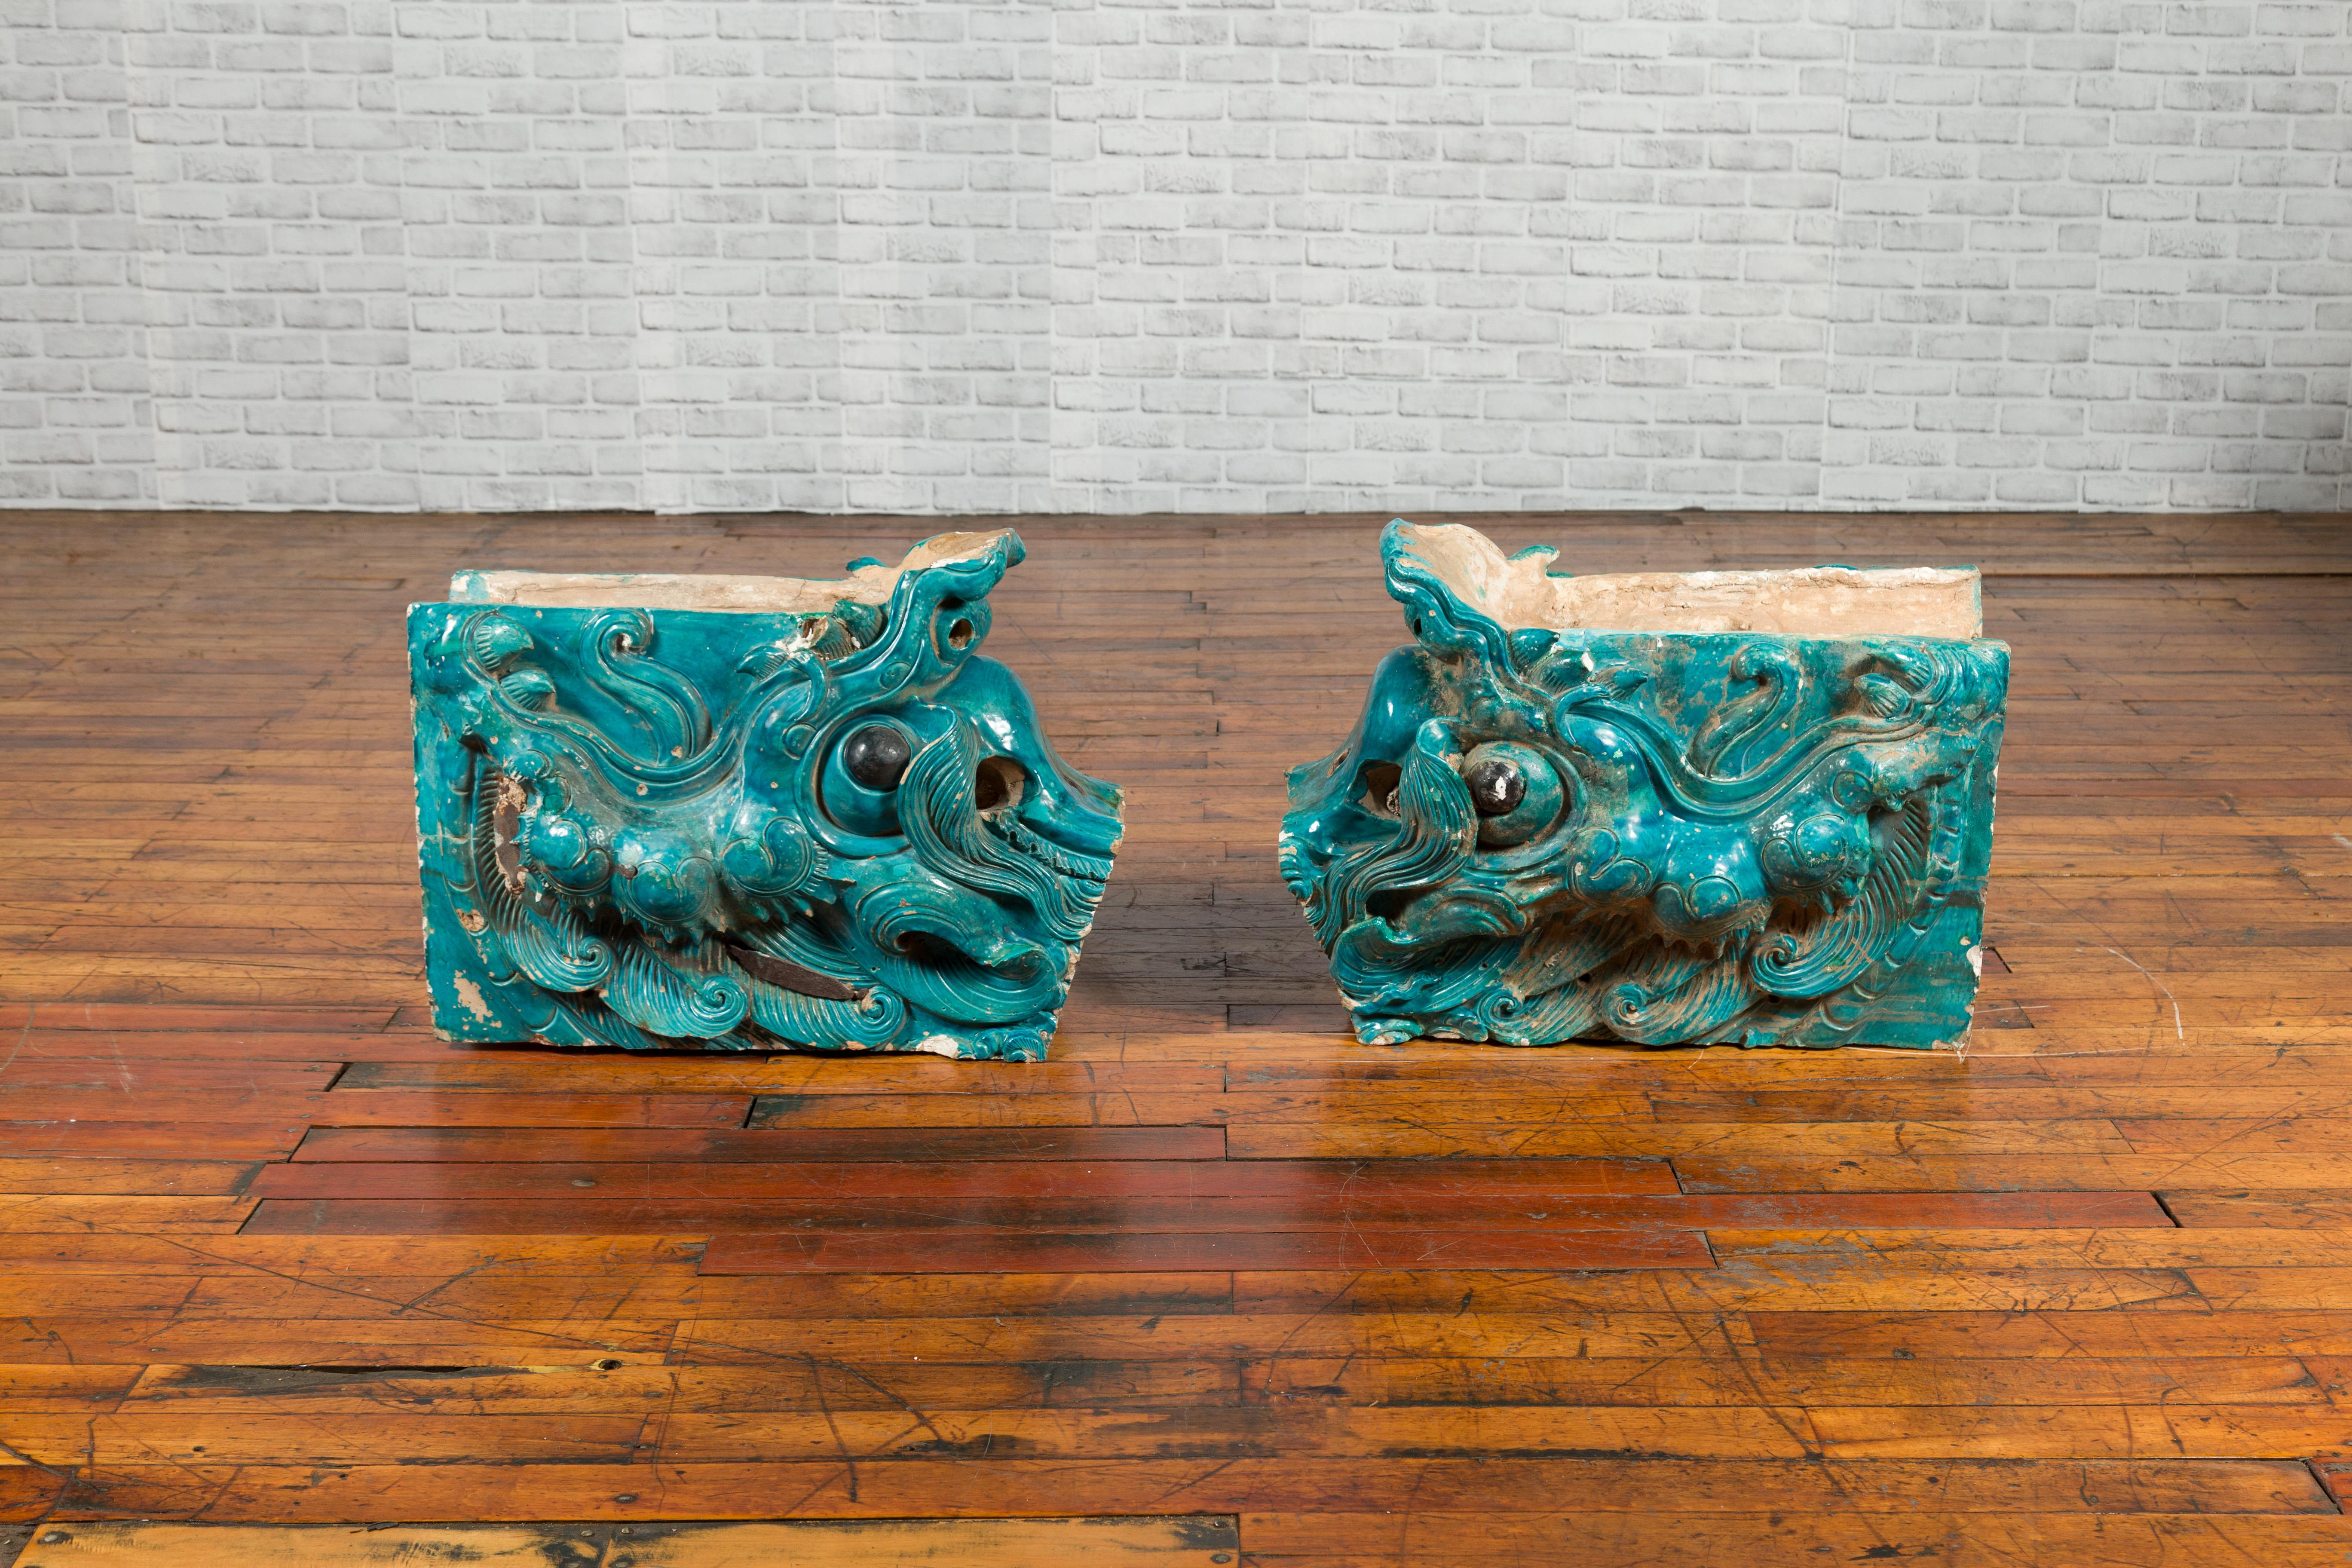 Chinese Pair of Ming Turquoise Glazed Temple Dragons from the 15th or 16th Century